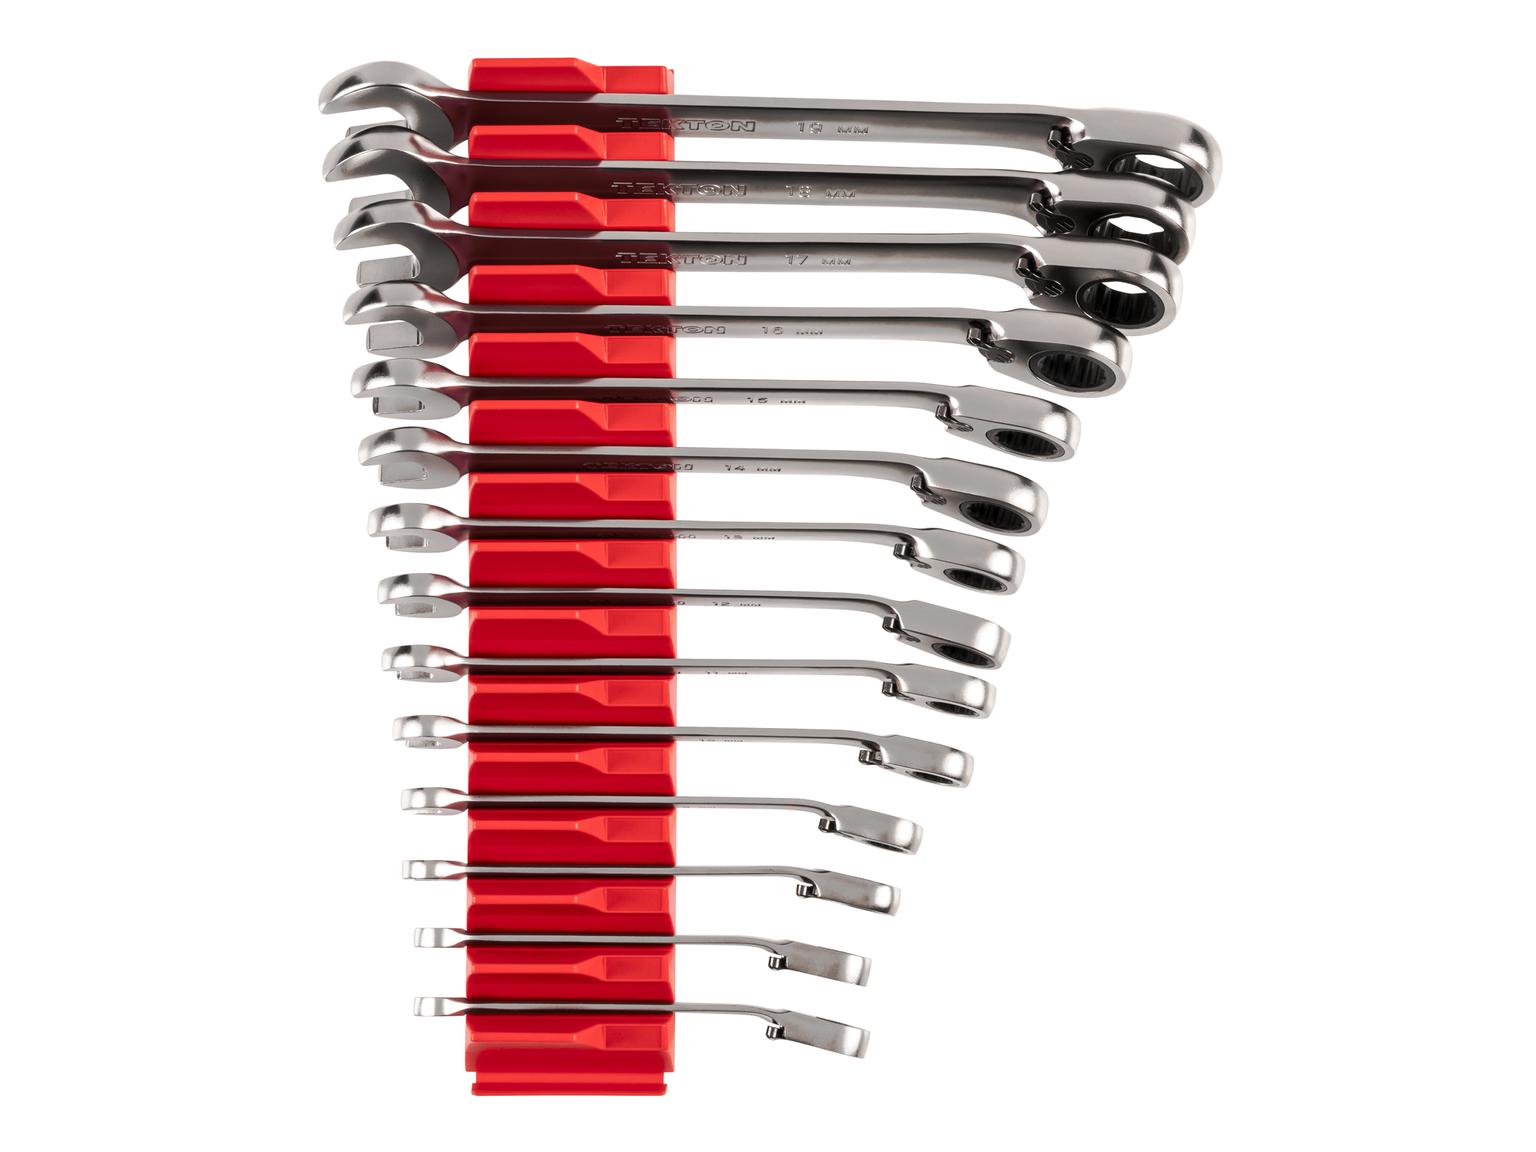 Reversible 12-Point Ratcheting Combination Wrench Set, 14-Piece (Modular Wrench Organizer)